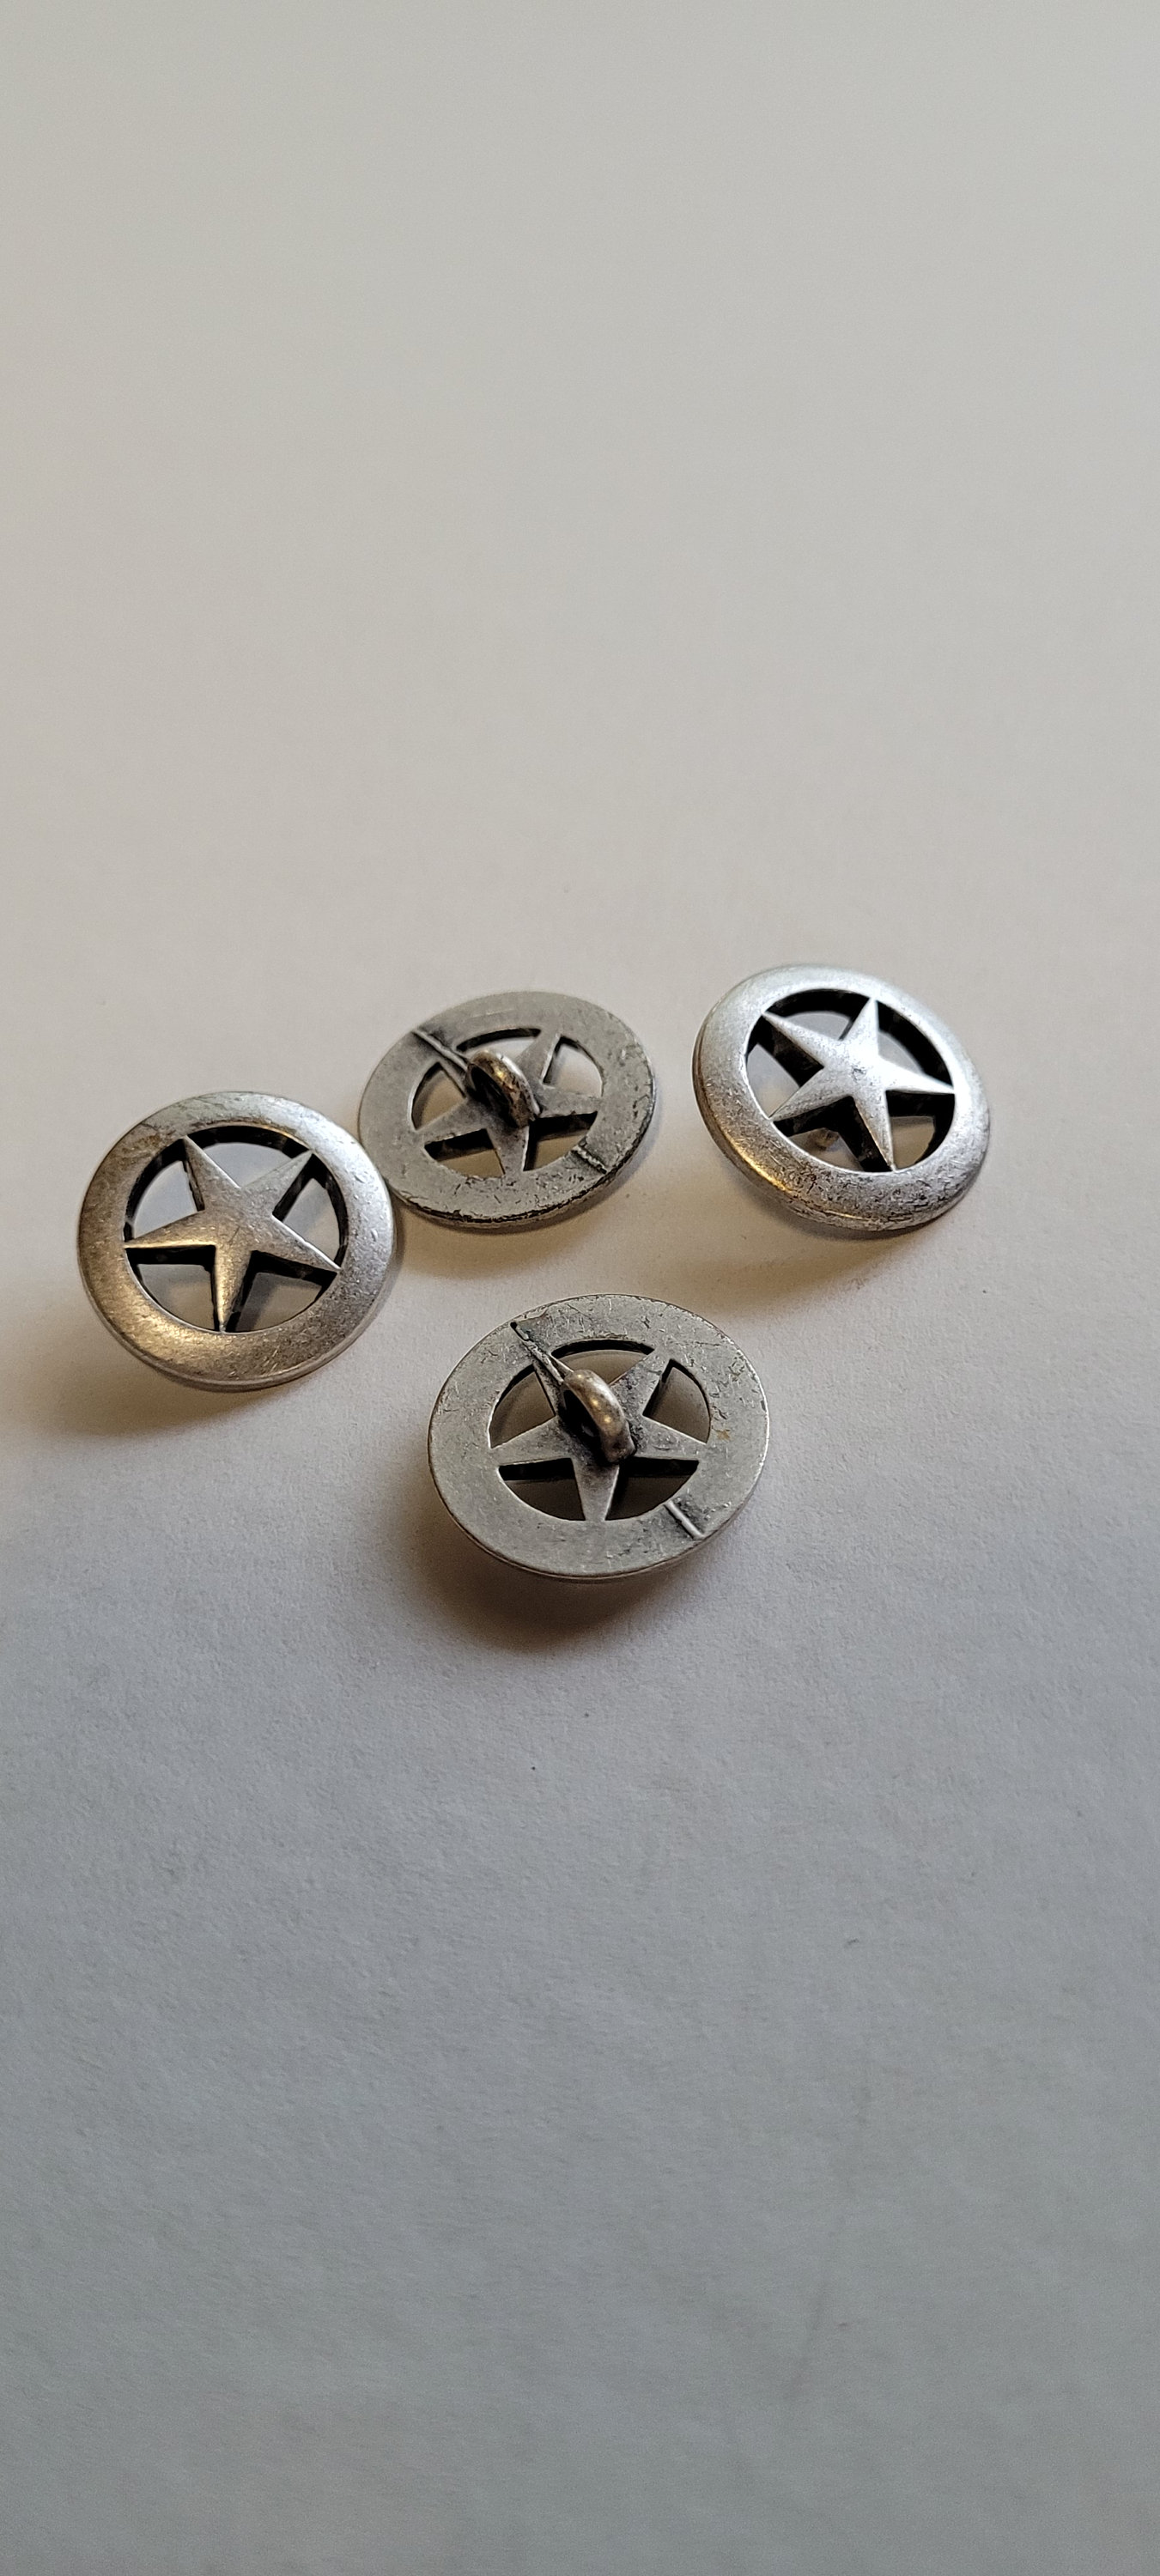 4 Hole Metal Buttons, Packaging Type: Packet at Rs 0.6/piece in